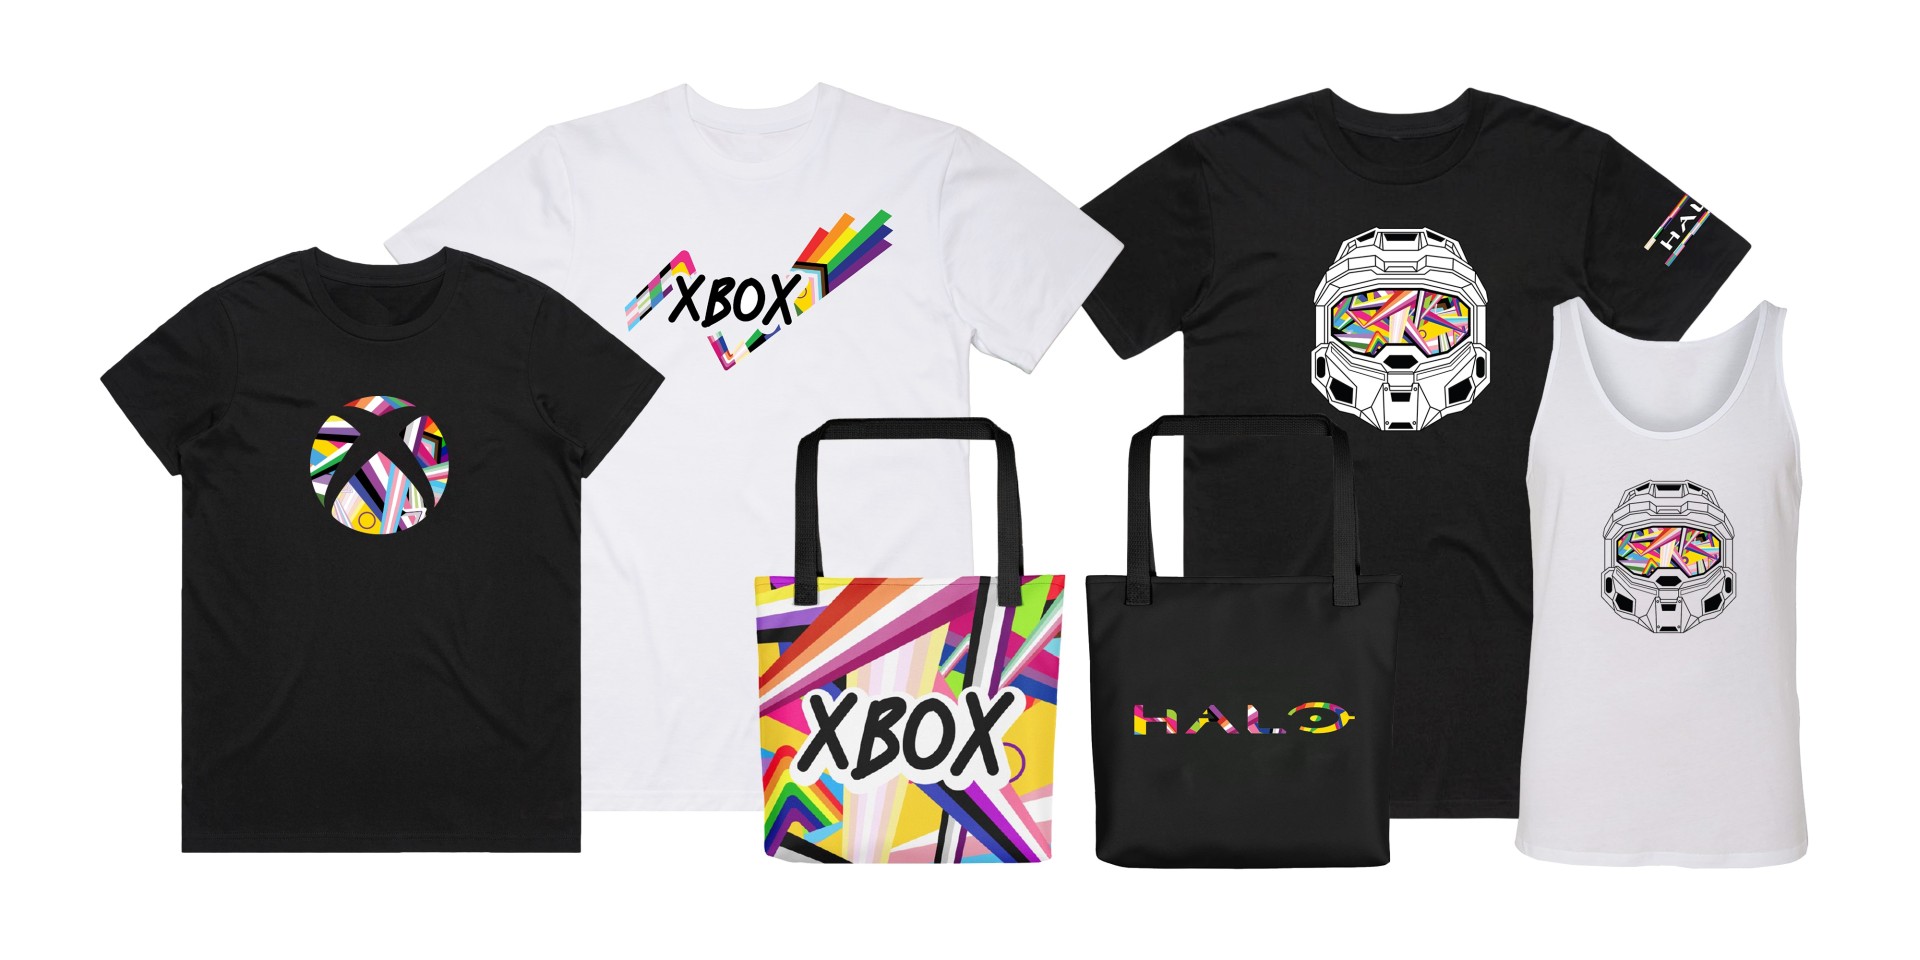  Xbox and Halo Pride themed unisex and women's fit T-shirts, tank tops and eco tote bags